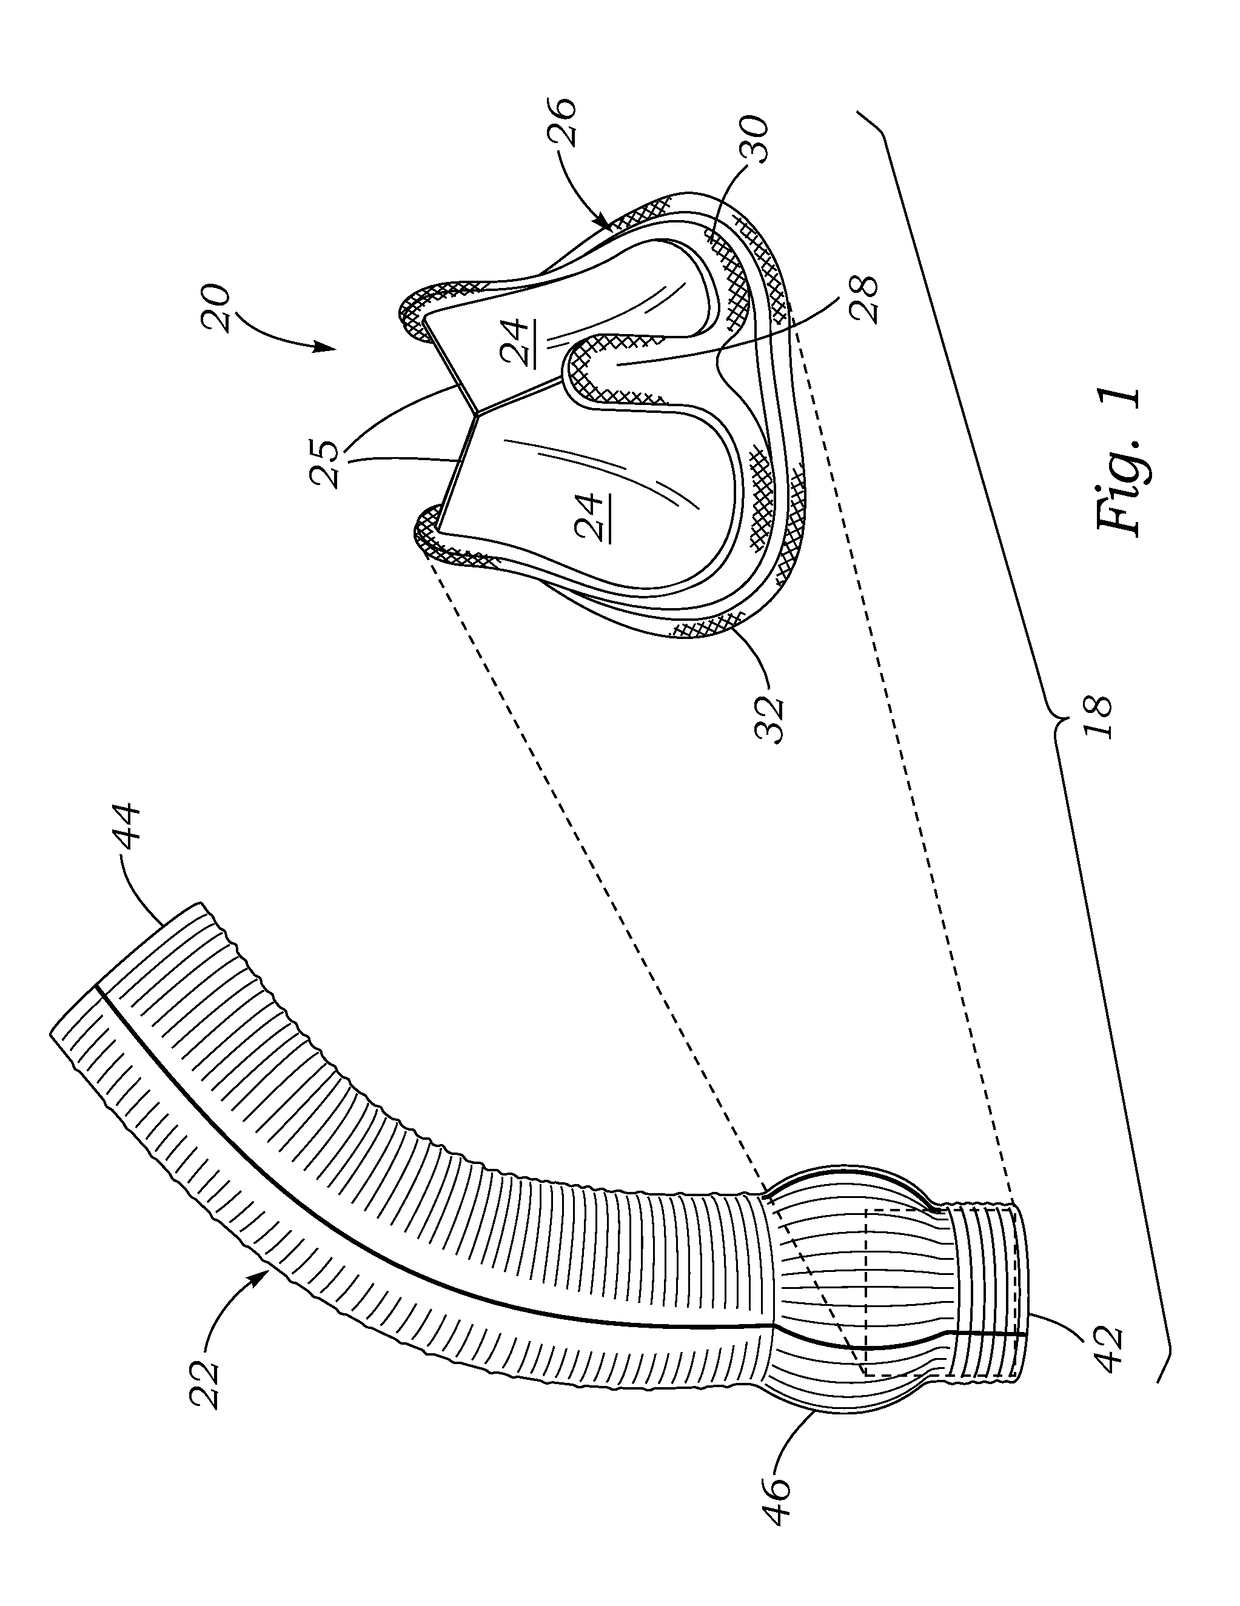 Aortic valve and conduit graft implant tool